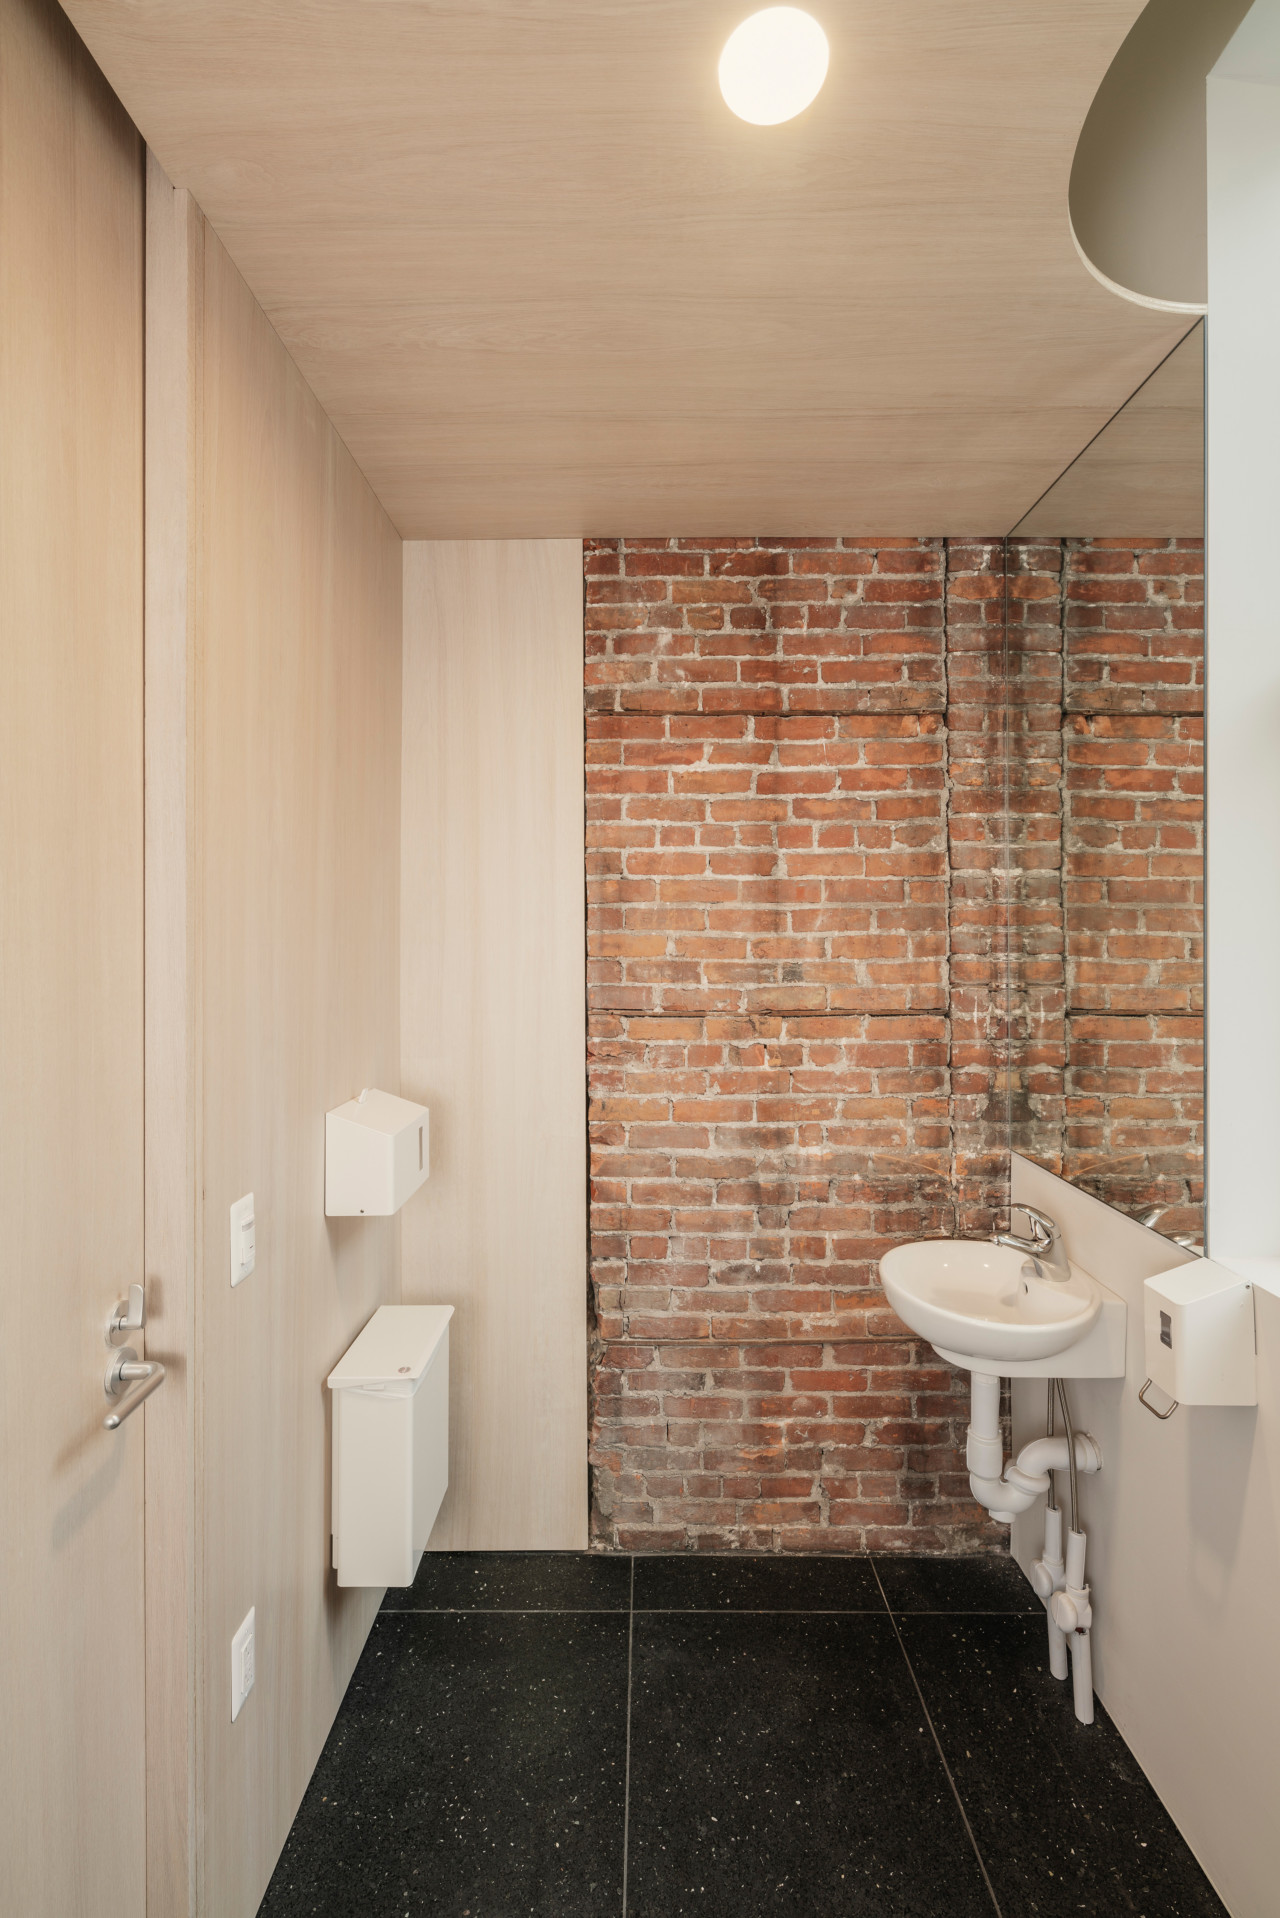 A bathroom with exposed brick